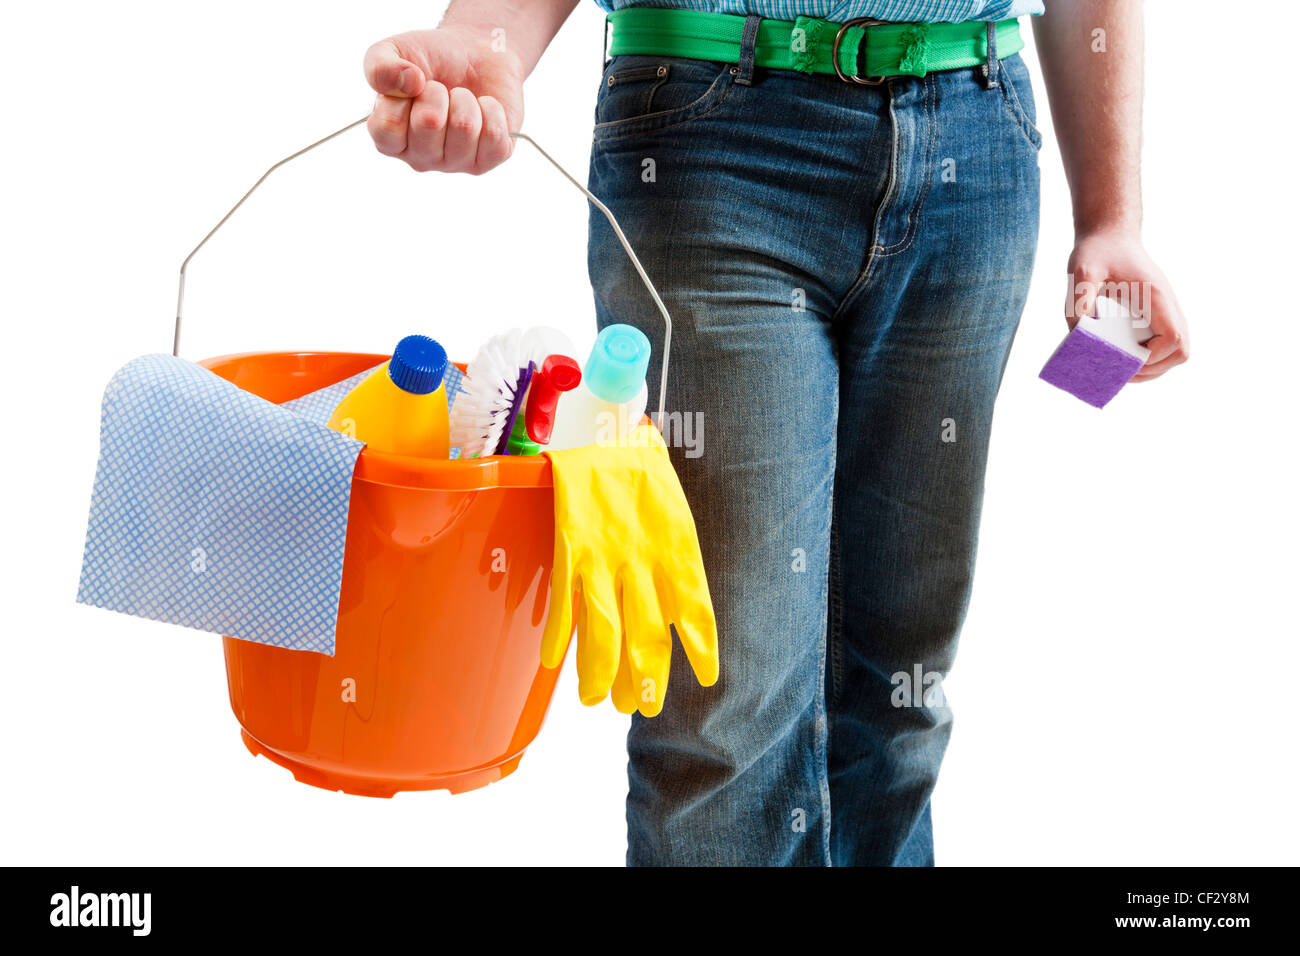 Spring cleaning concept. Young man carrying a bucket with cleaning products and materials and ready to clean up. Isolated on a white background. Stock Photo